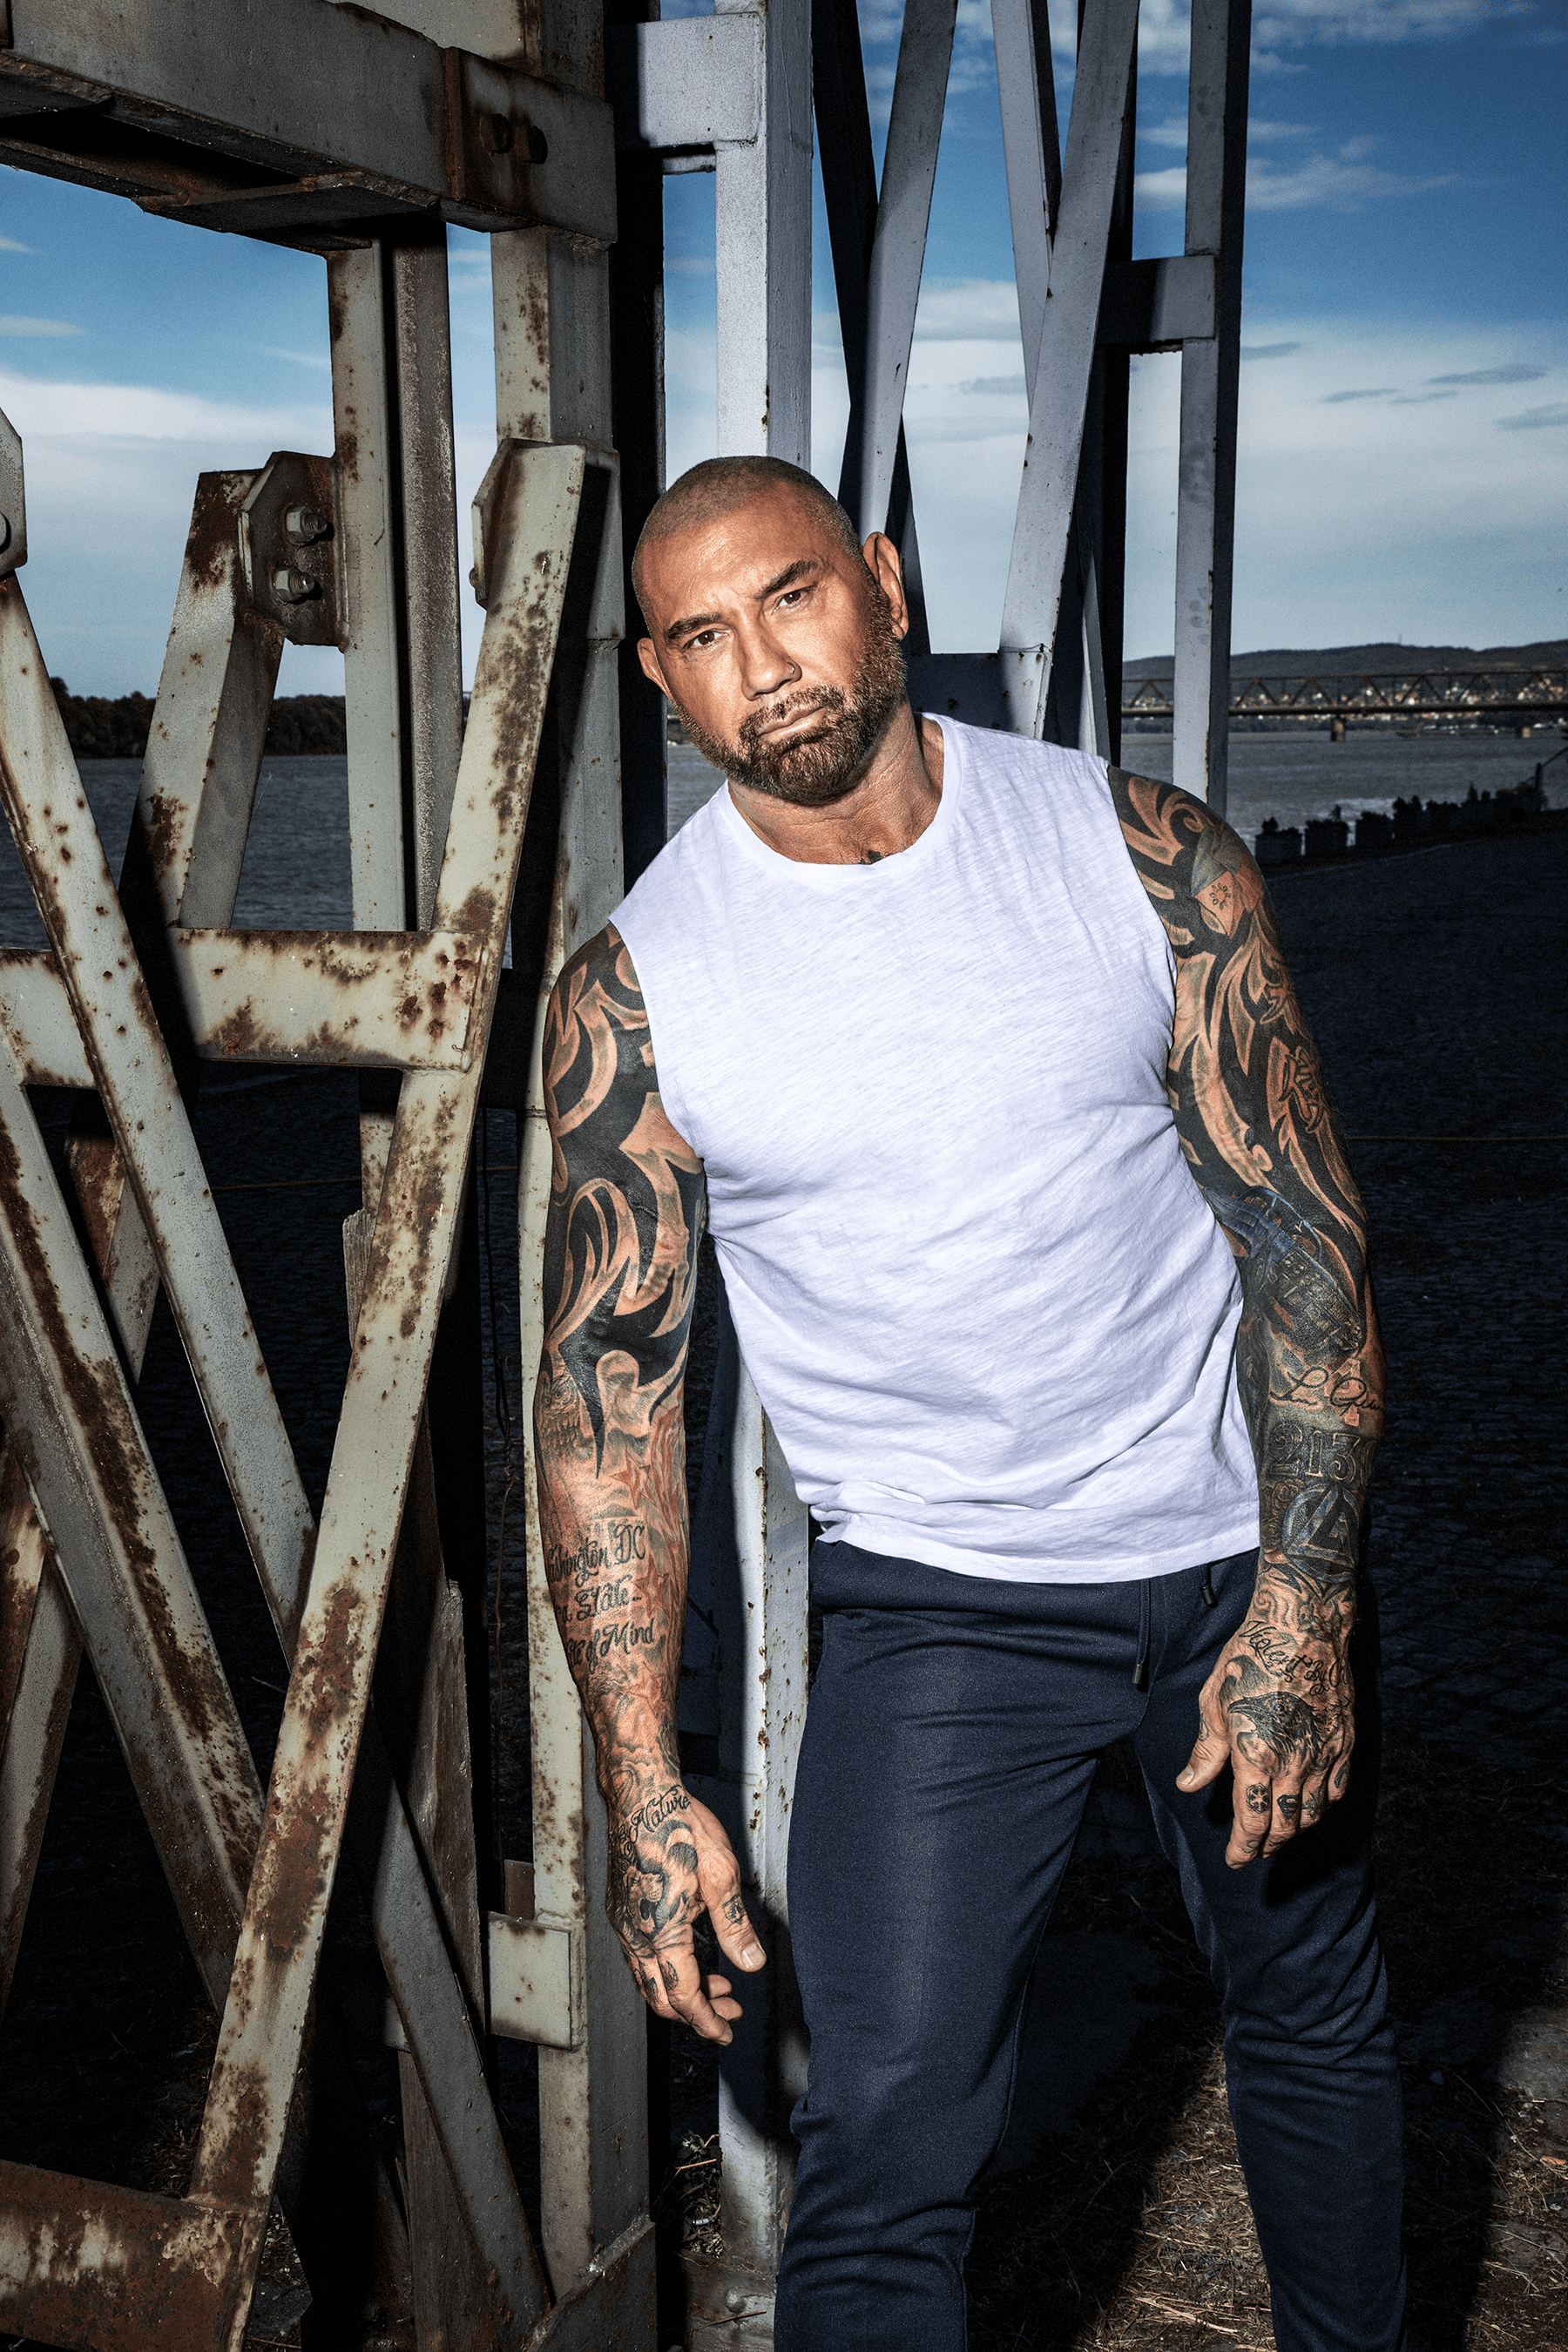 Dave Bautista Describes WWE as a Toxic Environment When He First Arrived